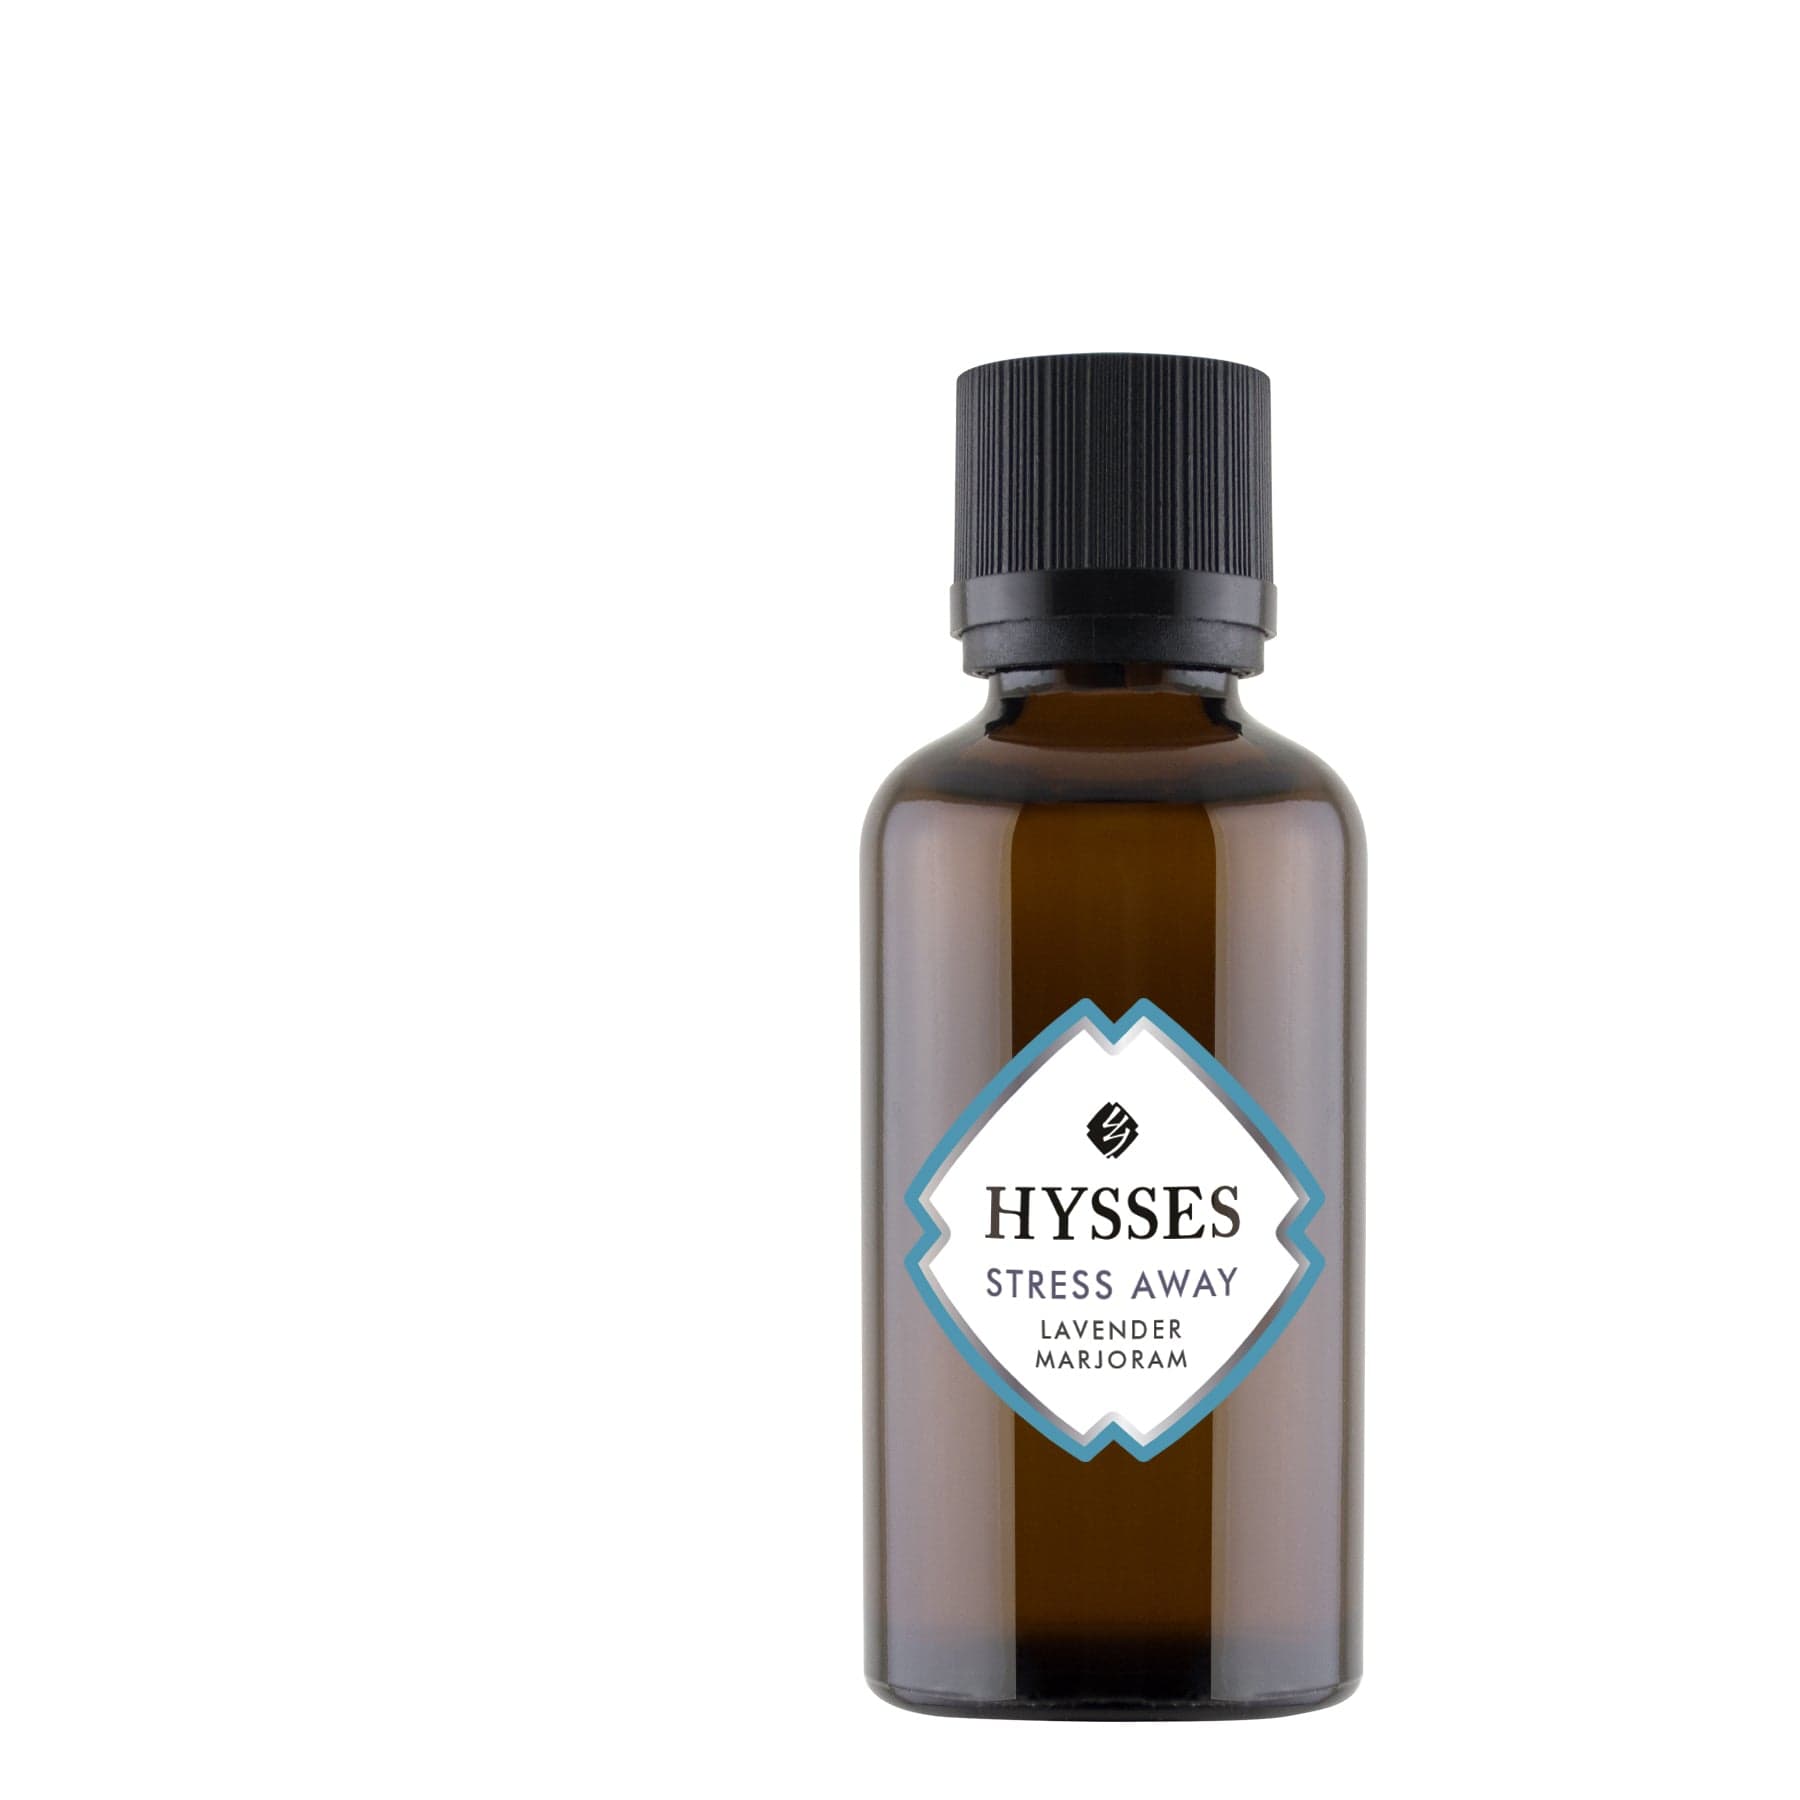 Hysses Essential Oil FurryCare, Stress Away